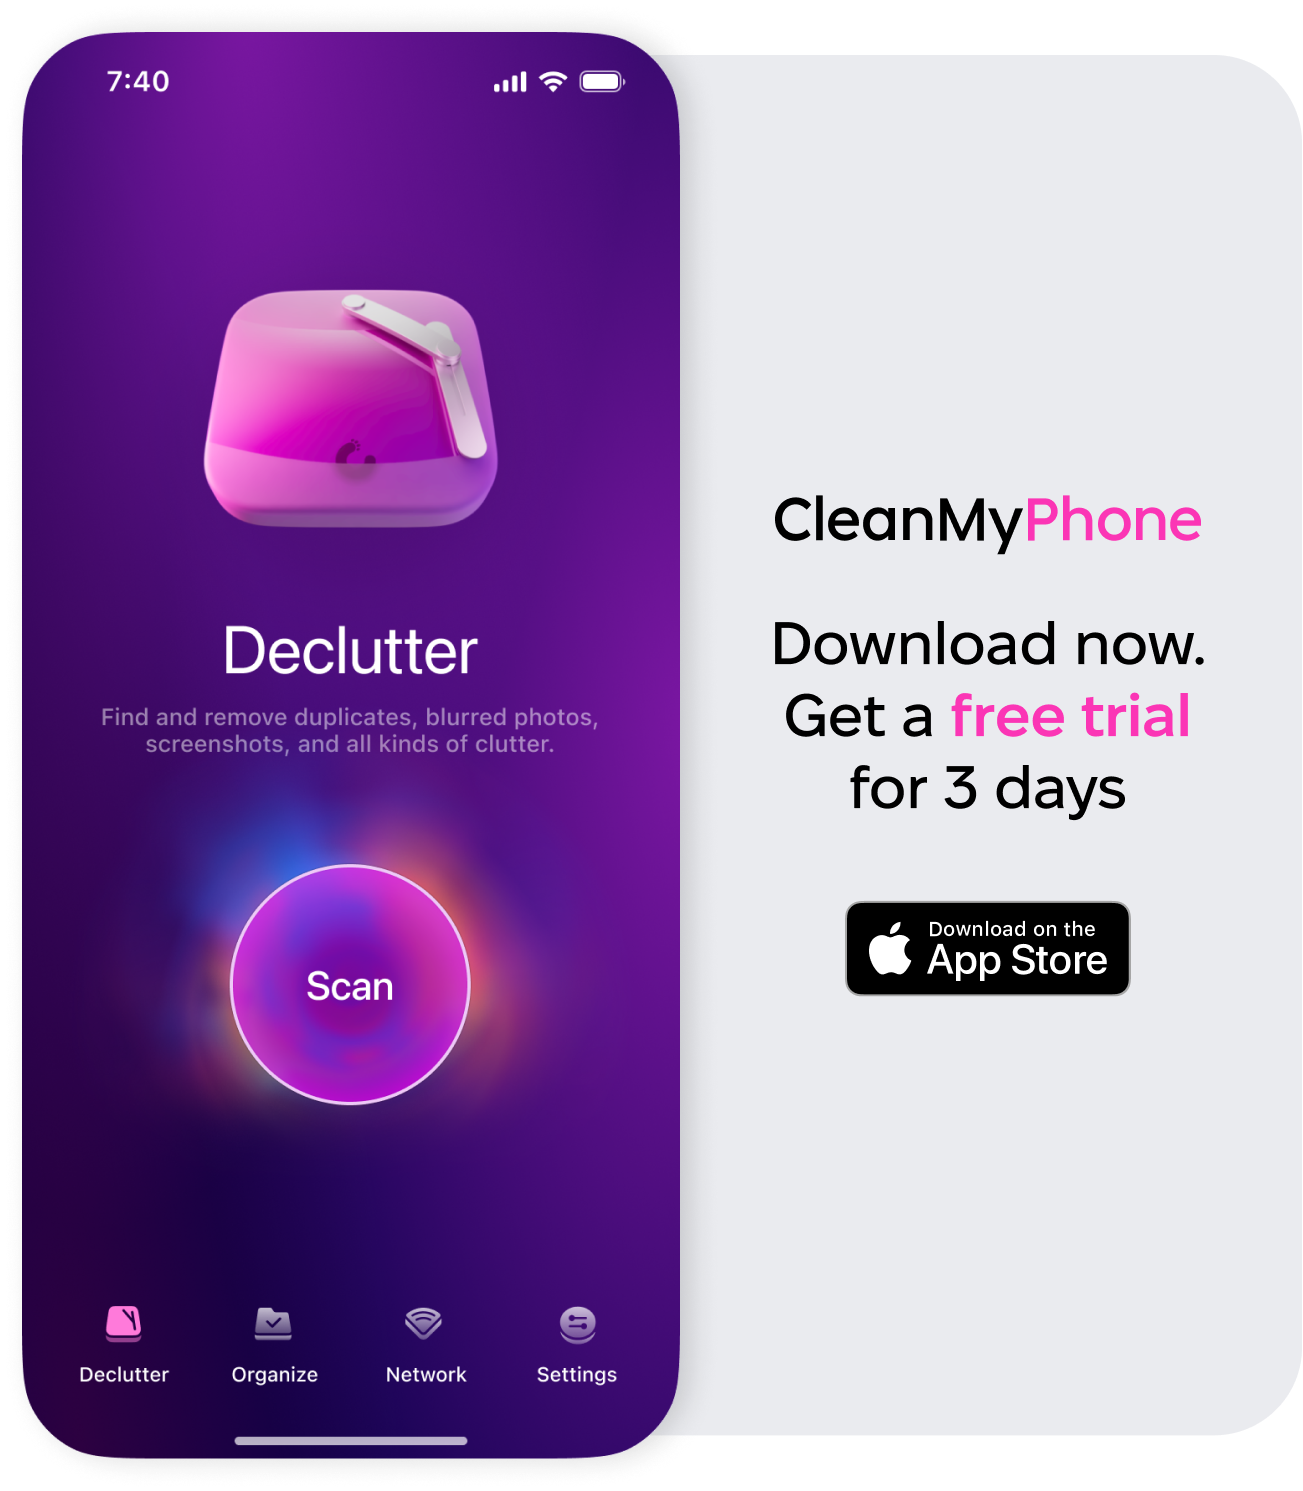 Declutter modul in CleanMy®Phone